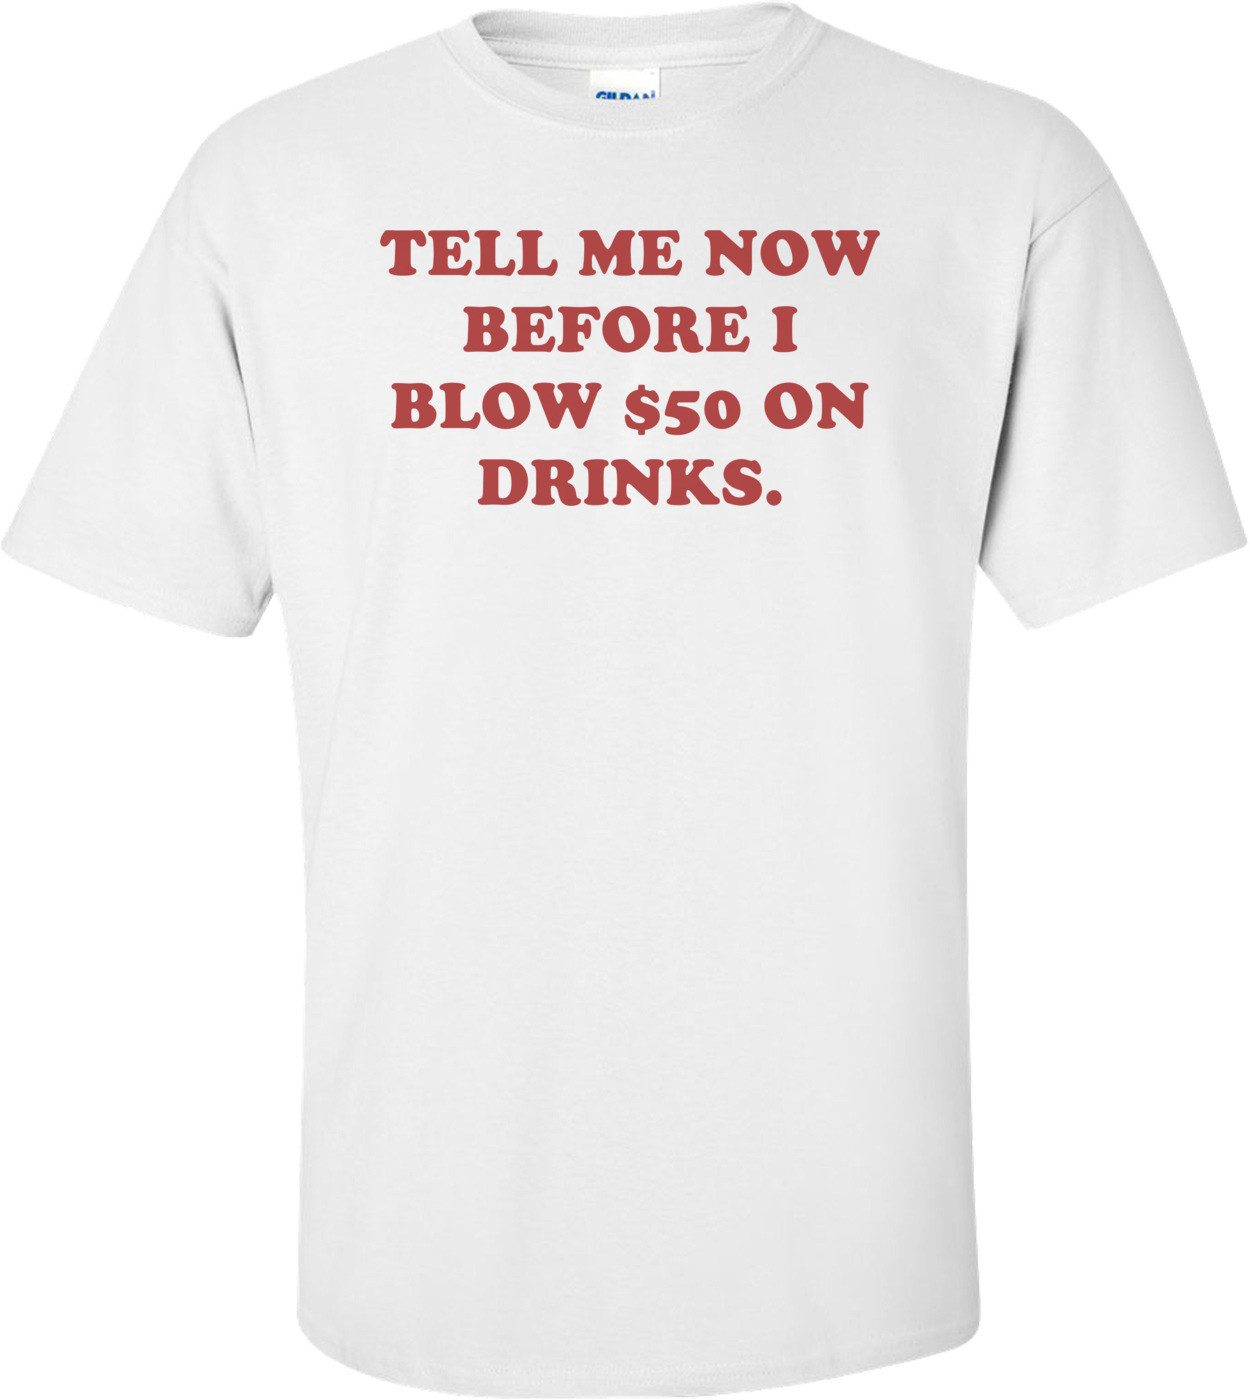 TELL ME NOW BEFORE I BLOW $50 ON DRINKS. Shirt